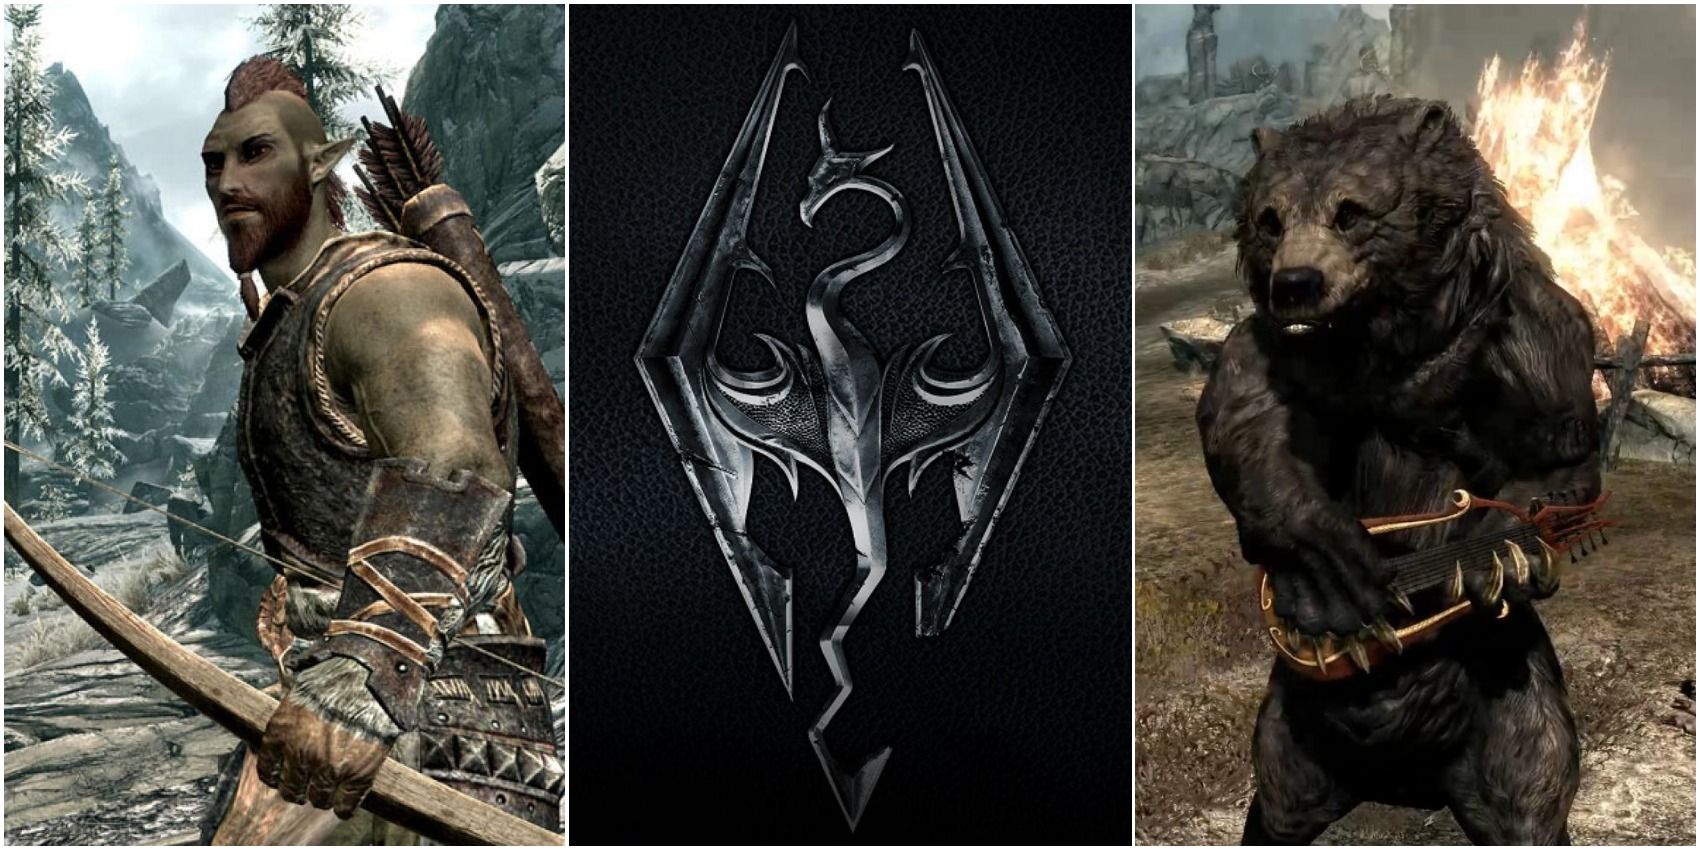 Skyrim logo and images of mods. Featured image for article about modding Skyrim.